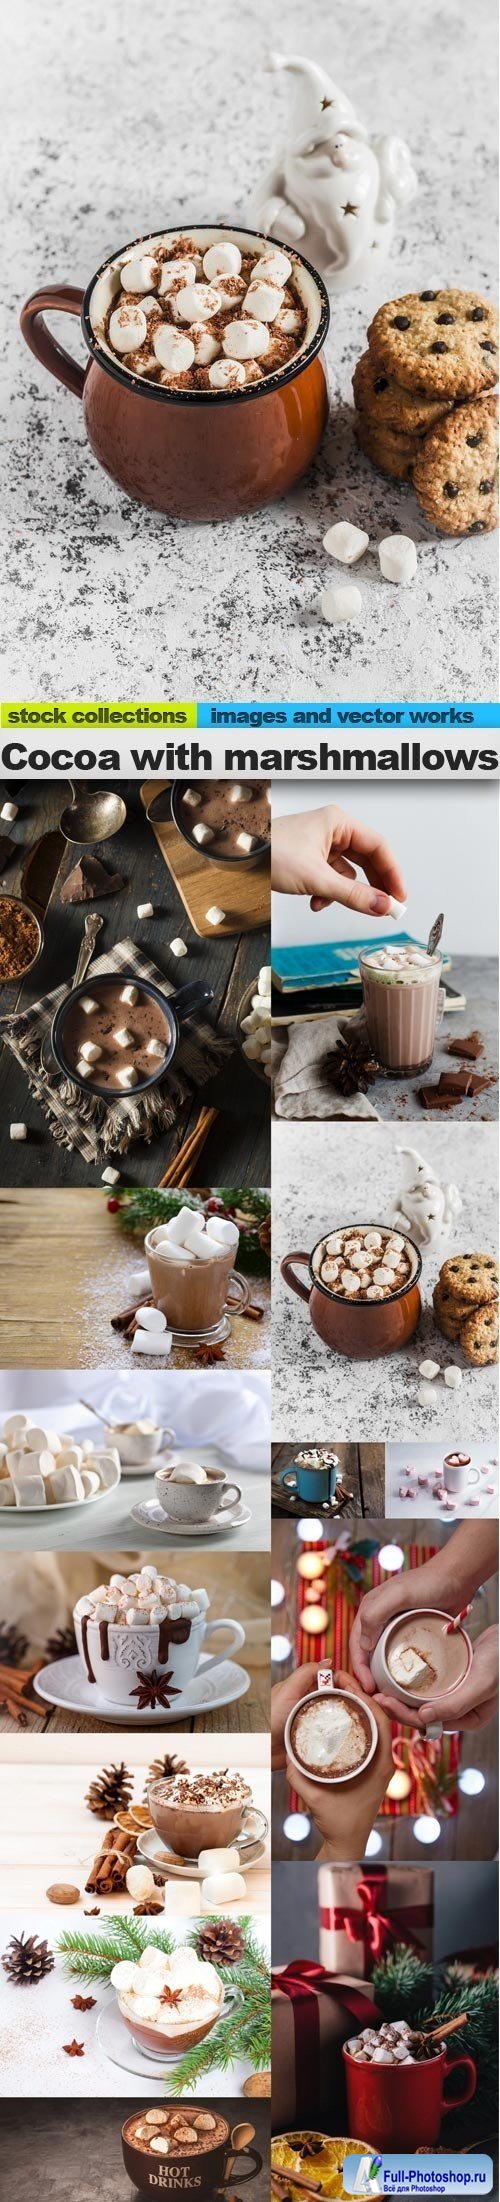 Cocoa with marshmallows 2